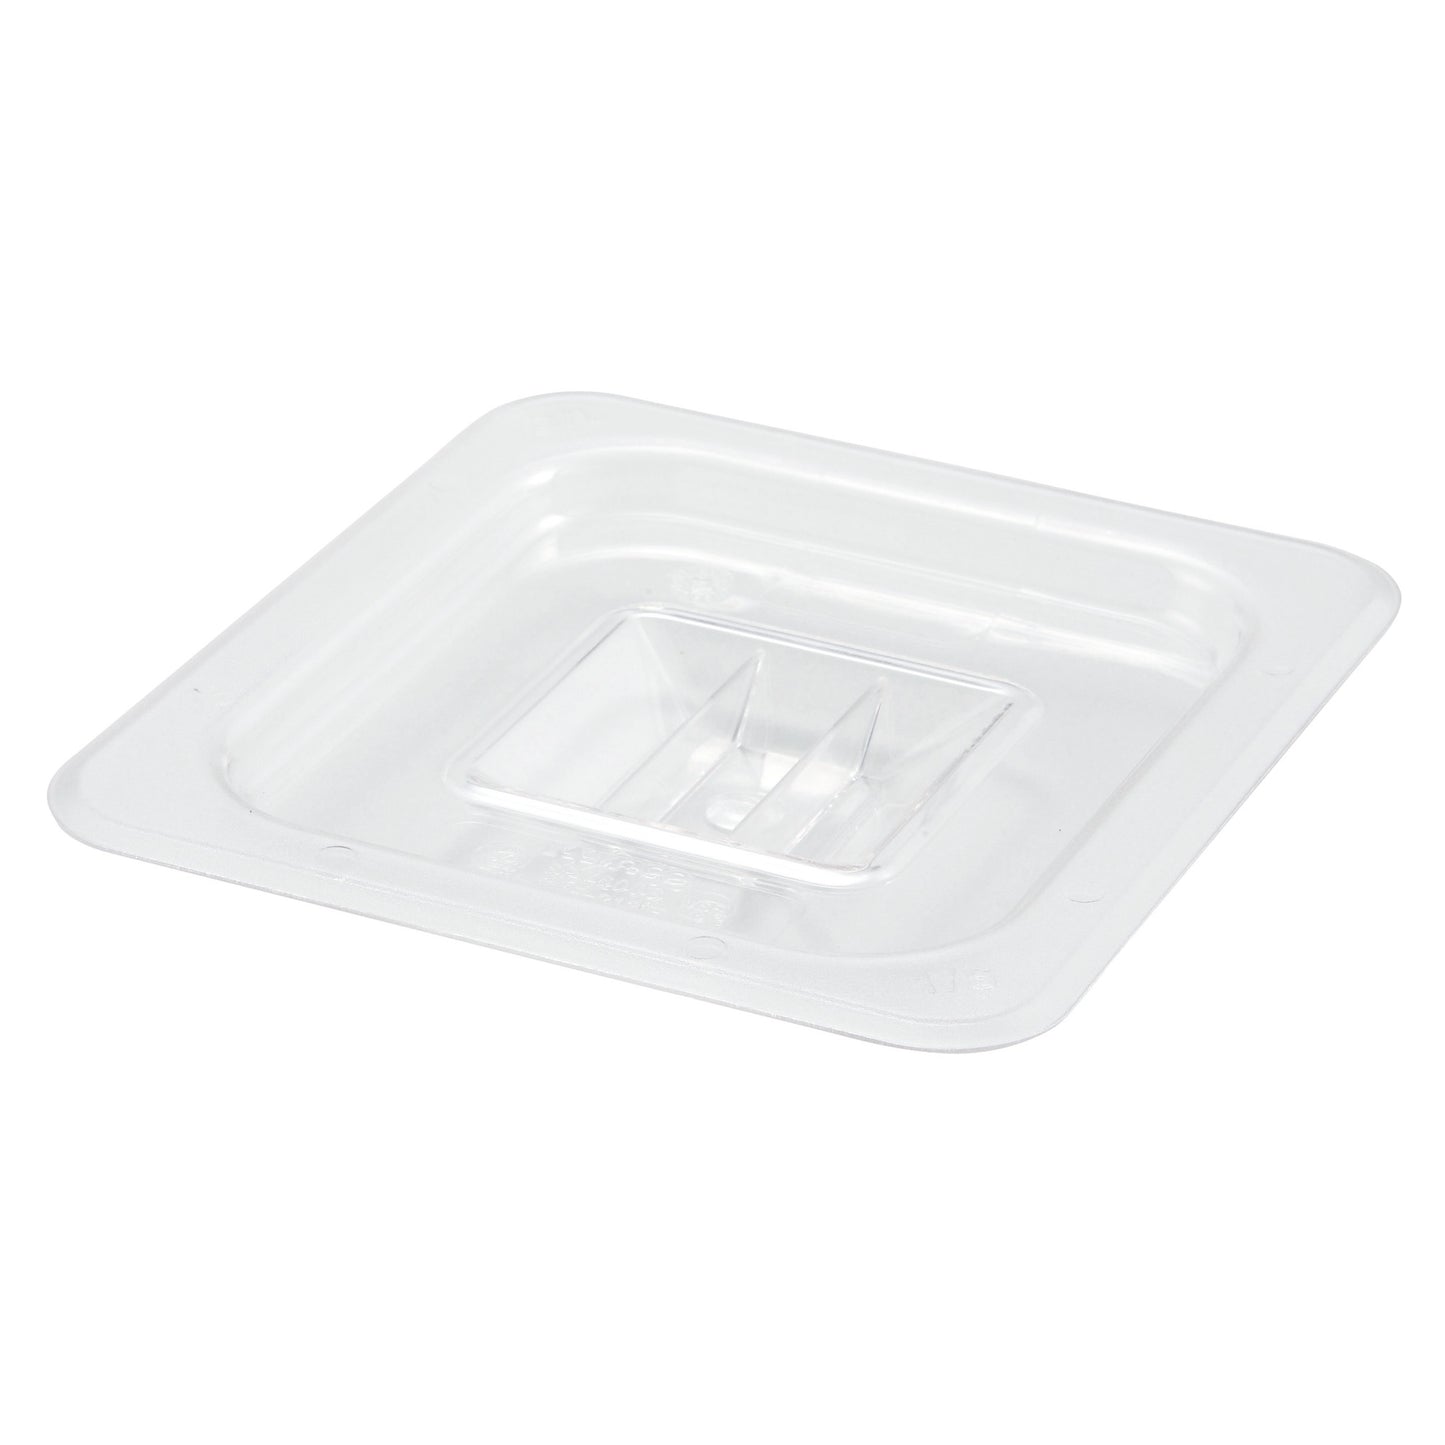 Polycarbonate Food Pan Cover, Solid - Sixth (1/6)